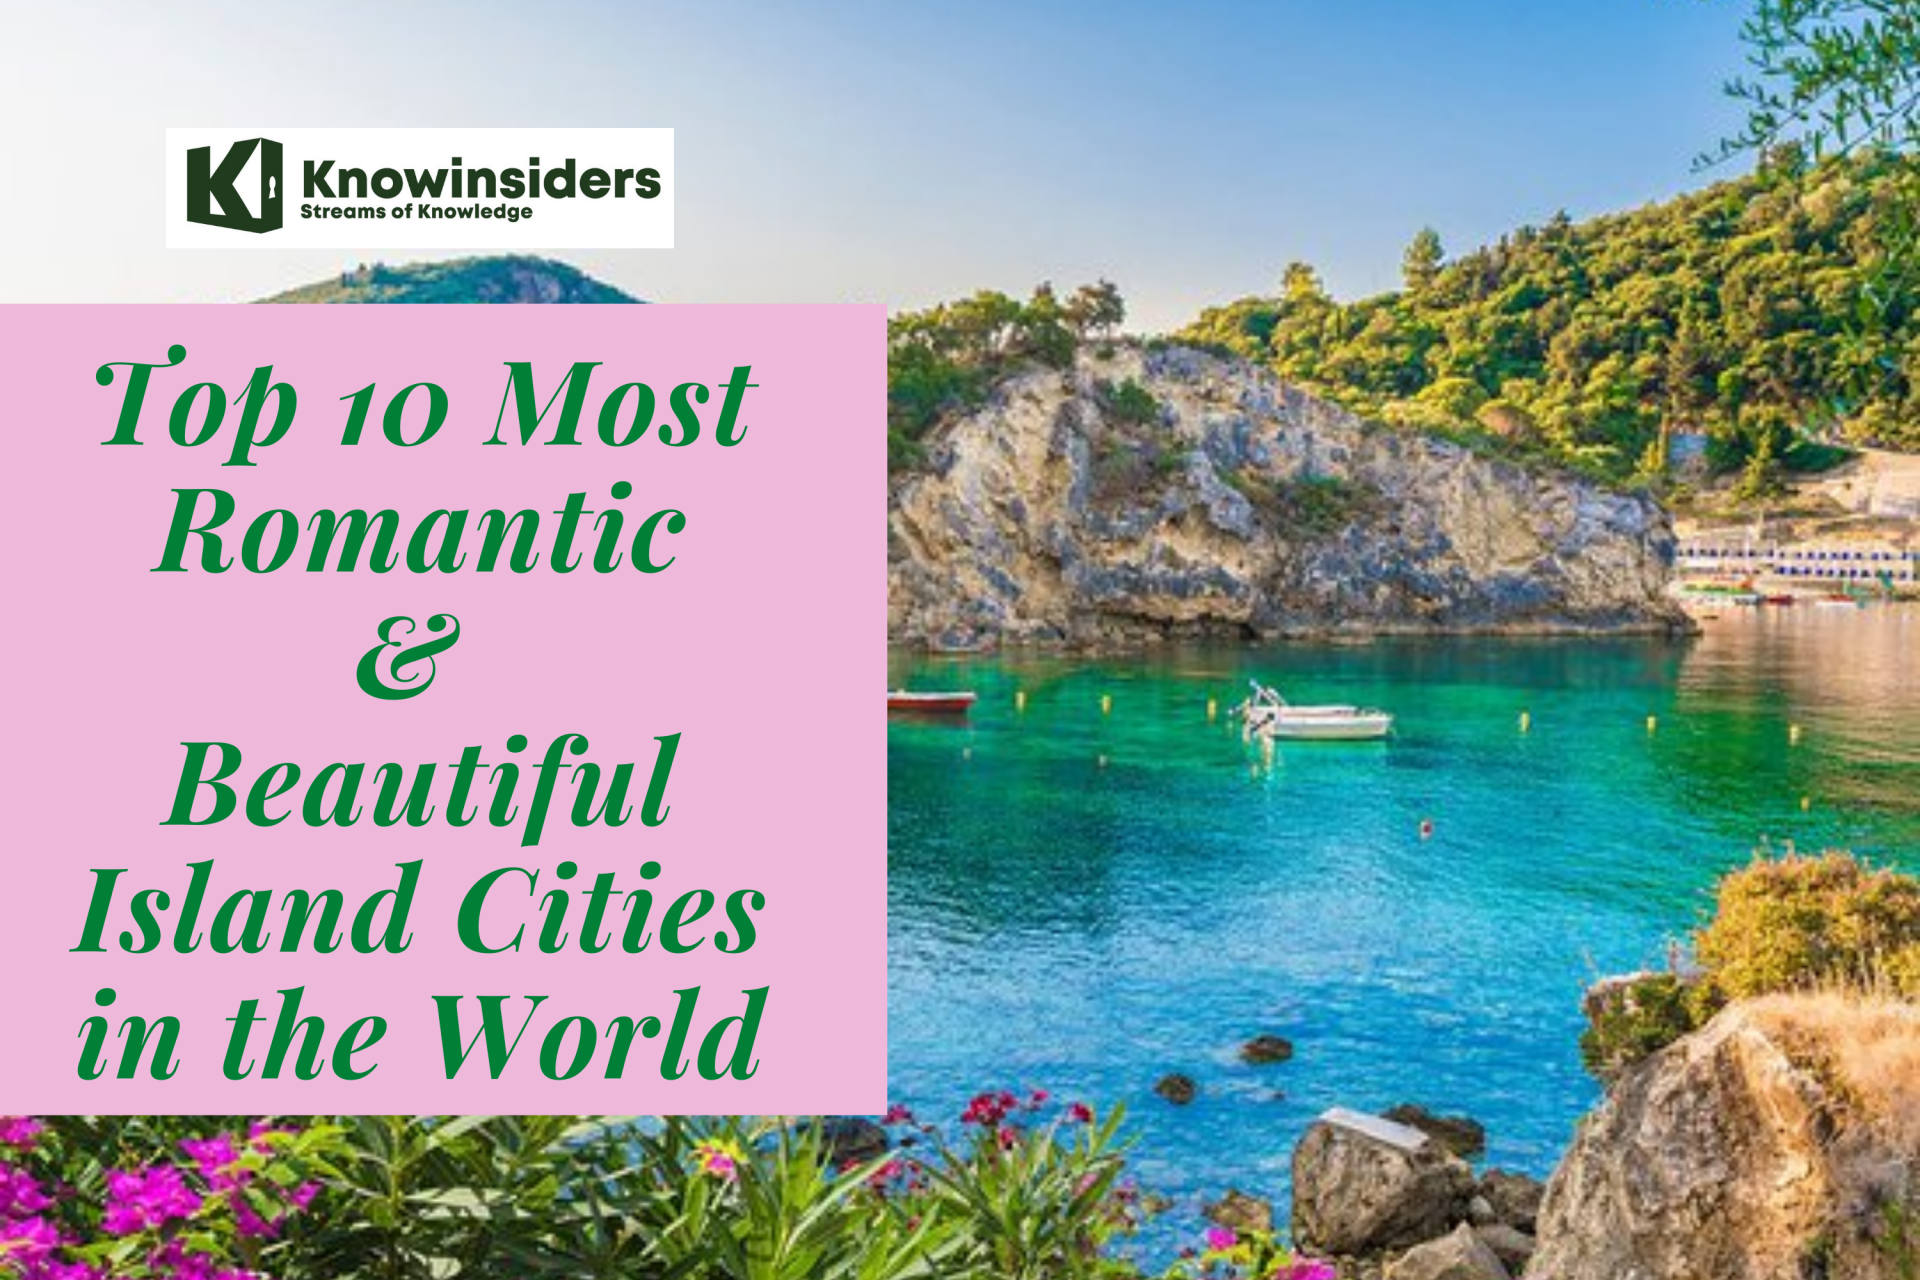 Top 10 Most Romantic and Beautiful Island Cities in the World